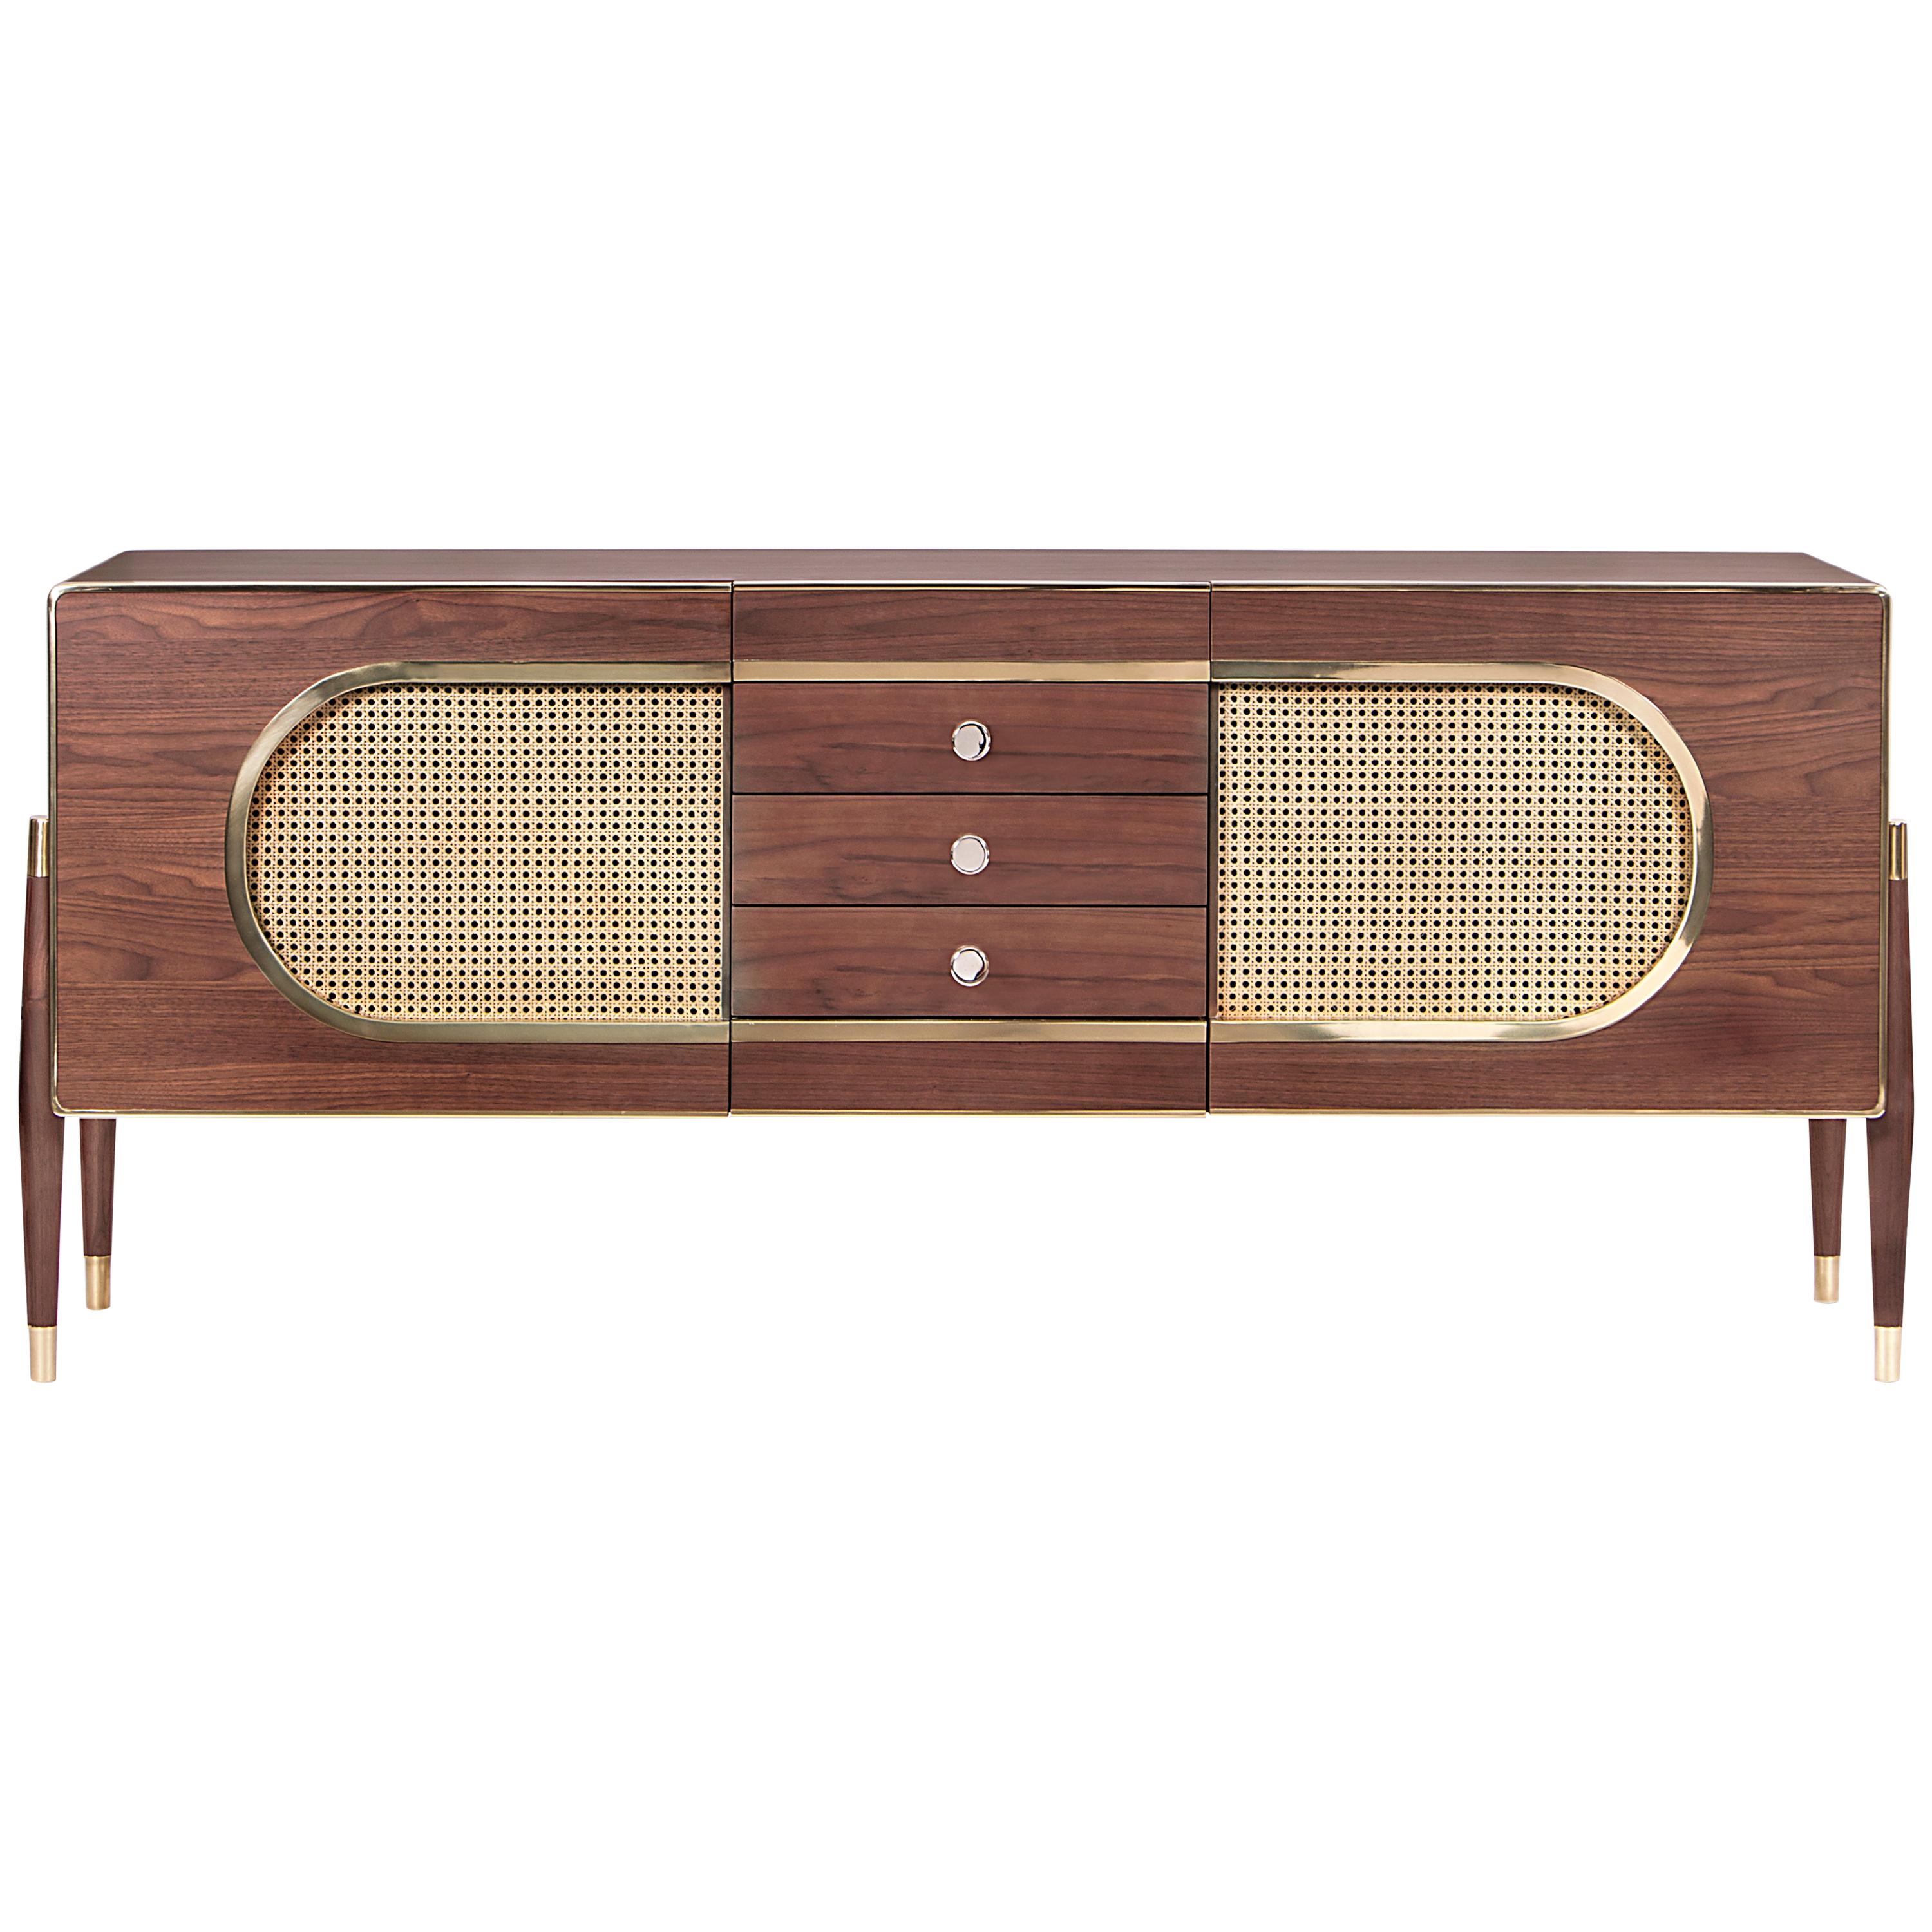 Dandy Sideboard in Wood with Brass Detail